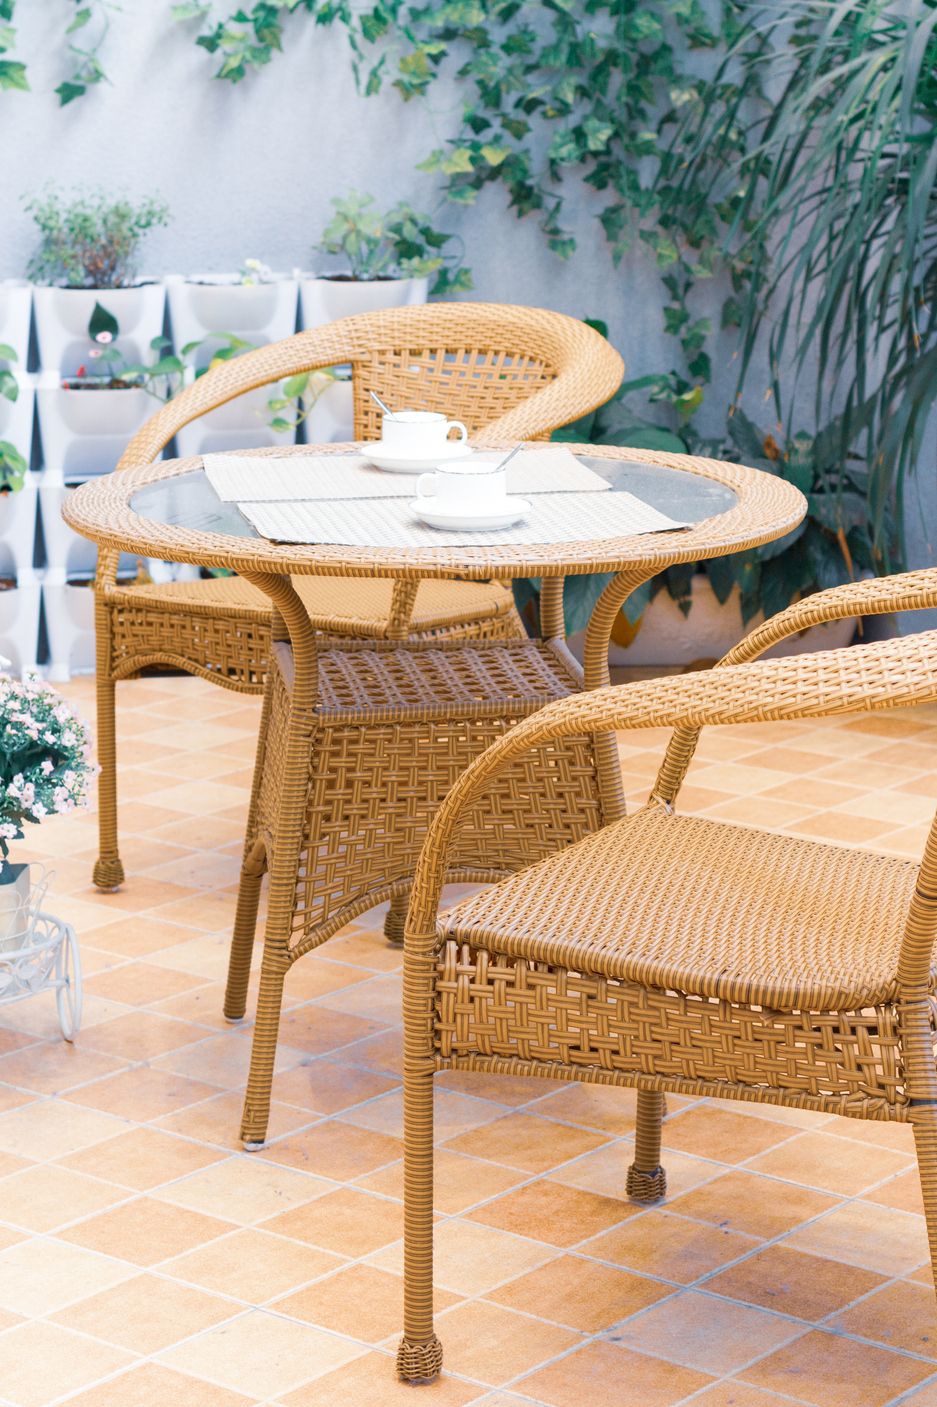 Make your patio decor pop without breaking the bank